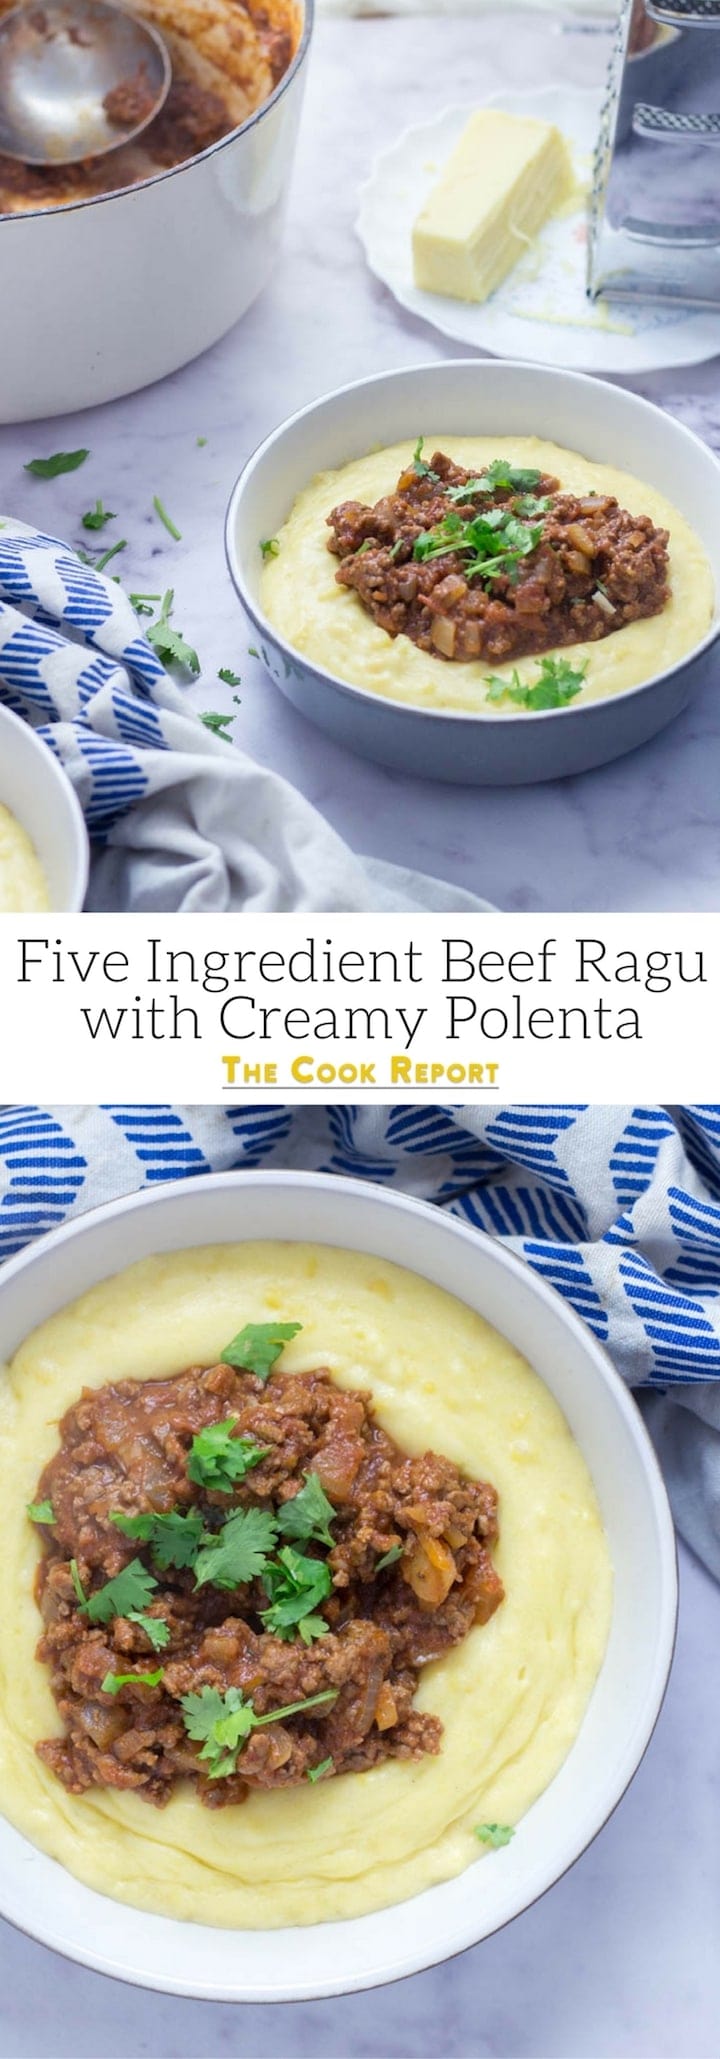 Five Ingredient Beef Ragu with Creamy Polenta. This beef ragu is the perfect quick, weeknight dinner. It takes only five ingredients to make and tastes amazing served over creamy, cheesy polenta. There's no better winter meal! #beefragu #polenta #recipe #dinner